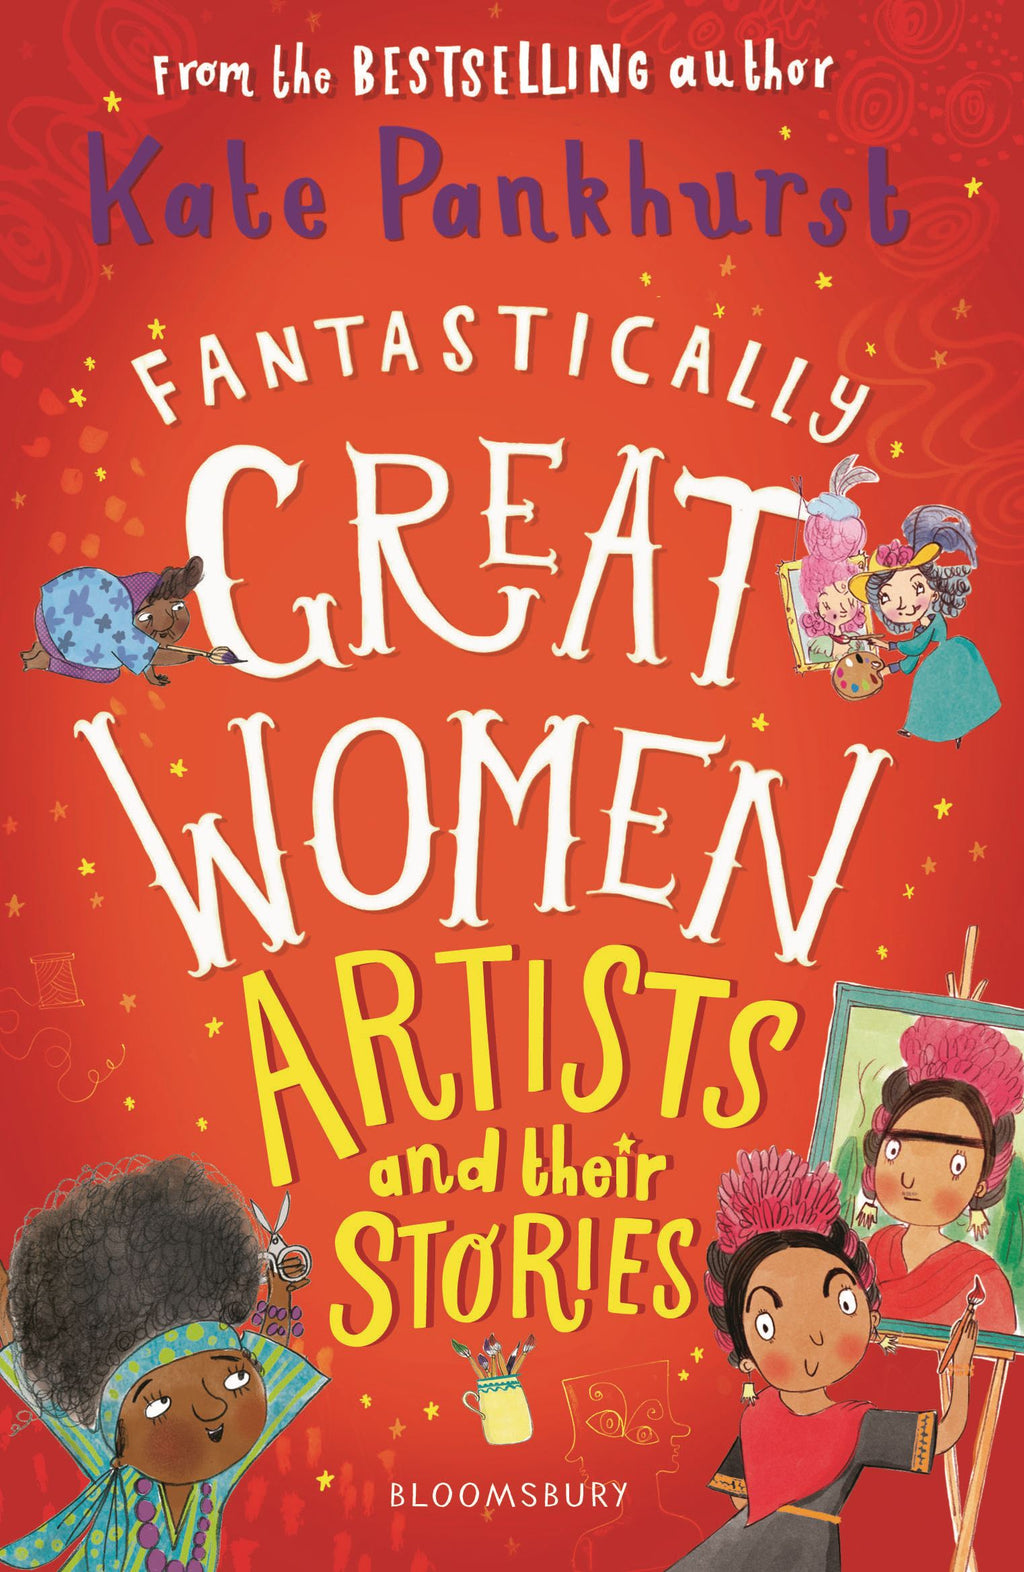 Fantastically Great Women Artists And Their Stories - NSPCC Shop